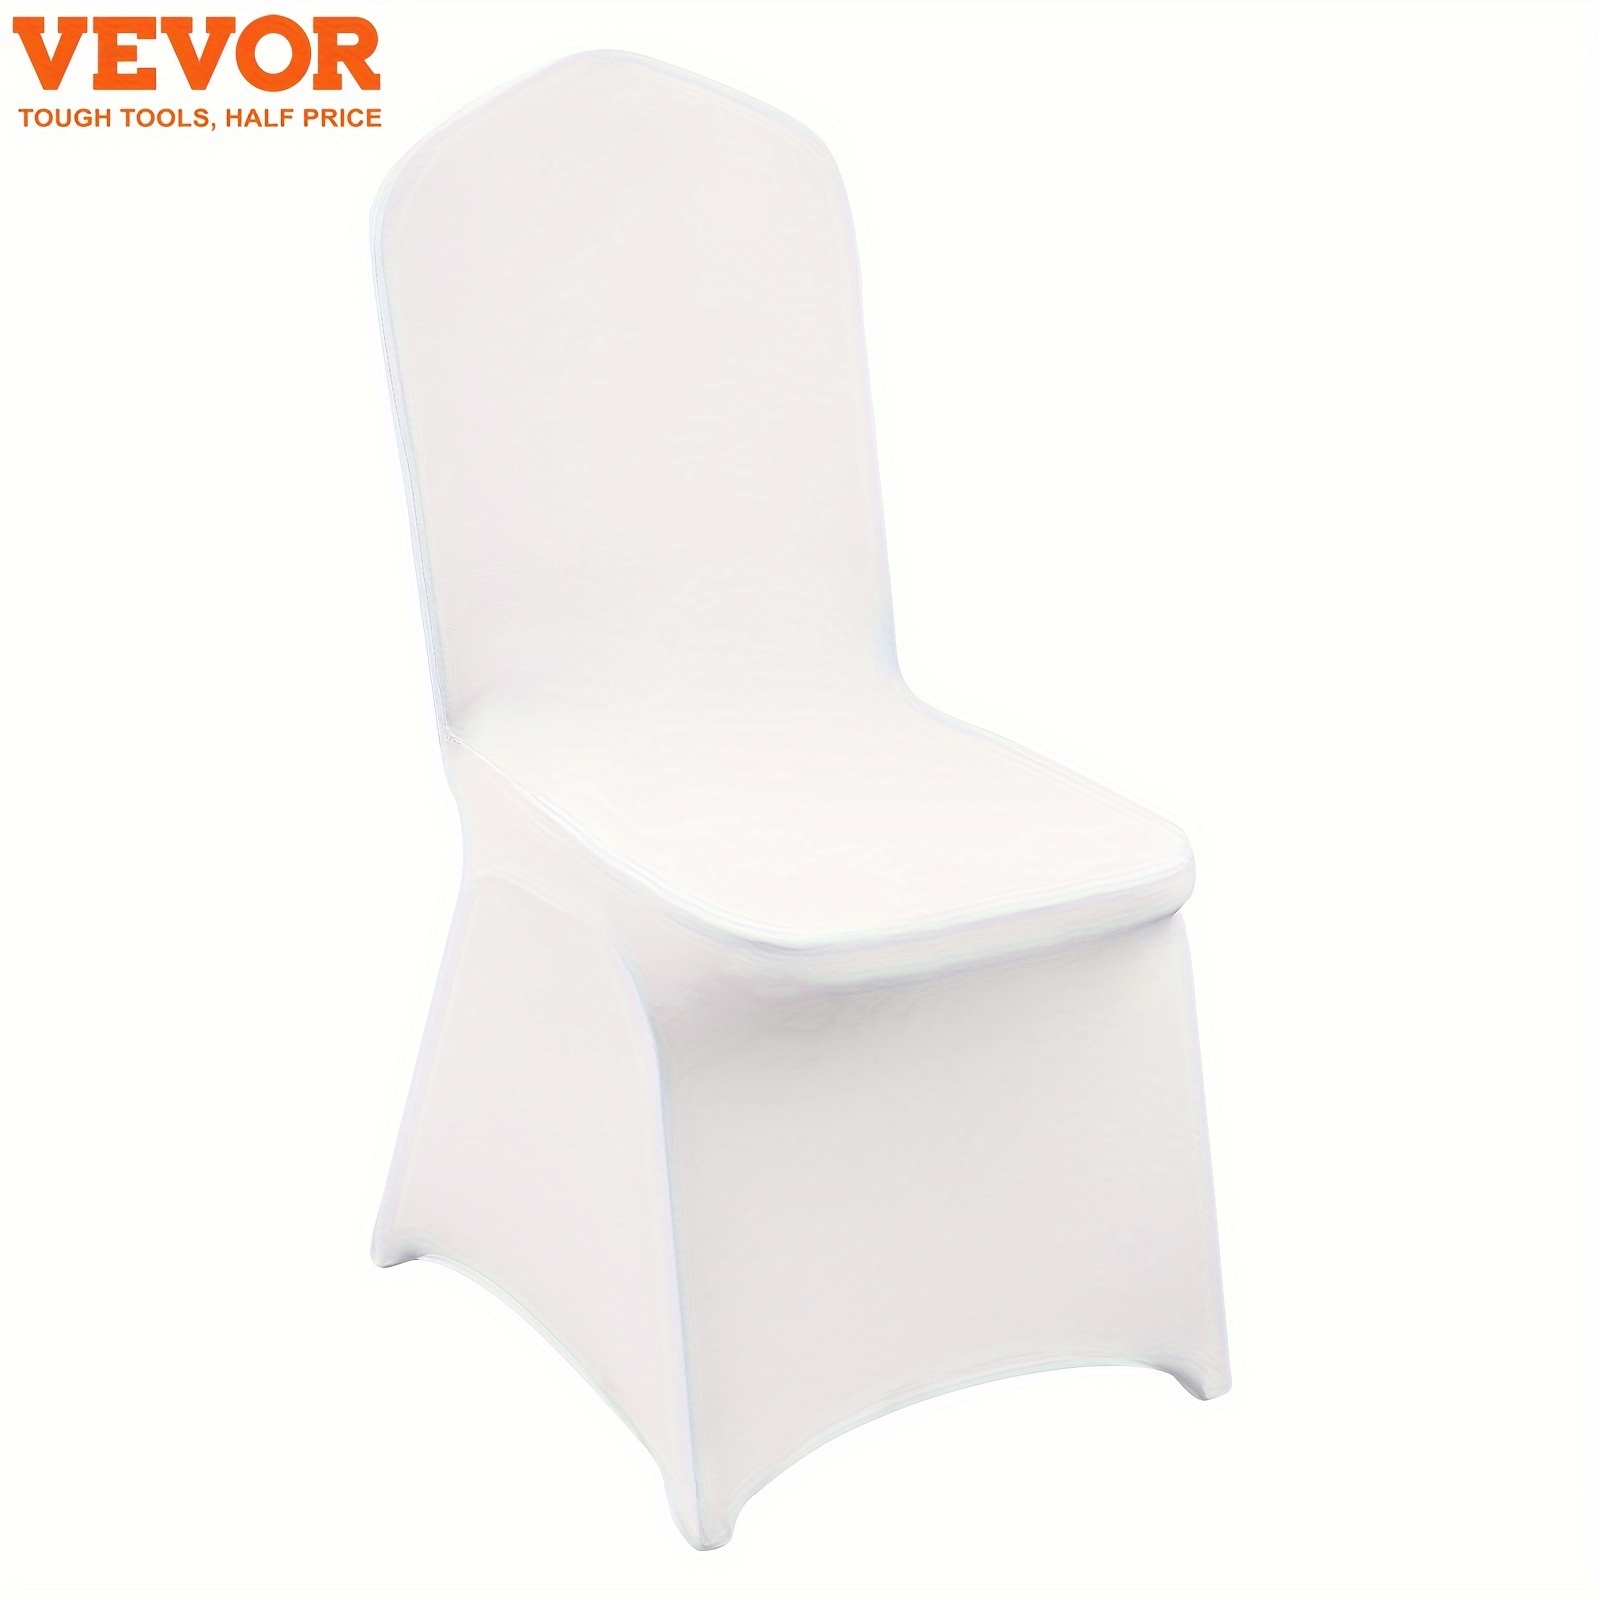 

Vevor 150 Pcs White Chair Covers Polyester Spandex Chair Cover Stretch Slipcovers For Wedding Party Dining Banquet Flat-front Chair Cover